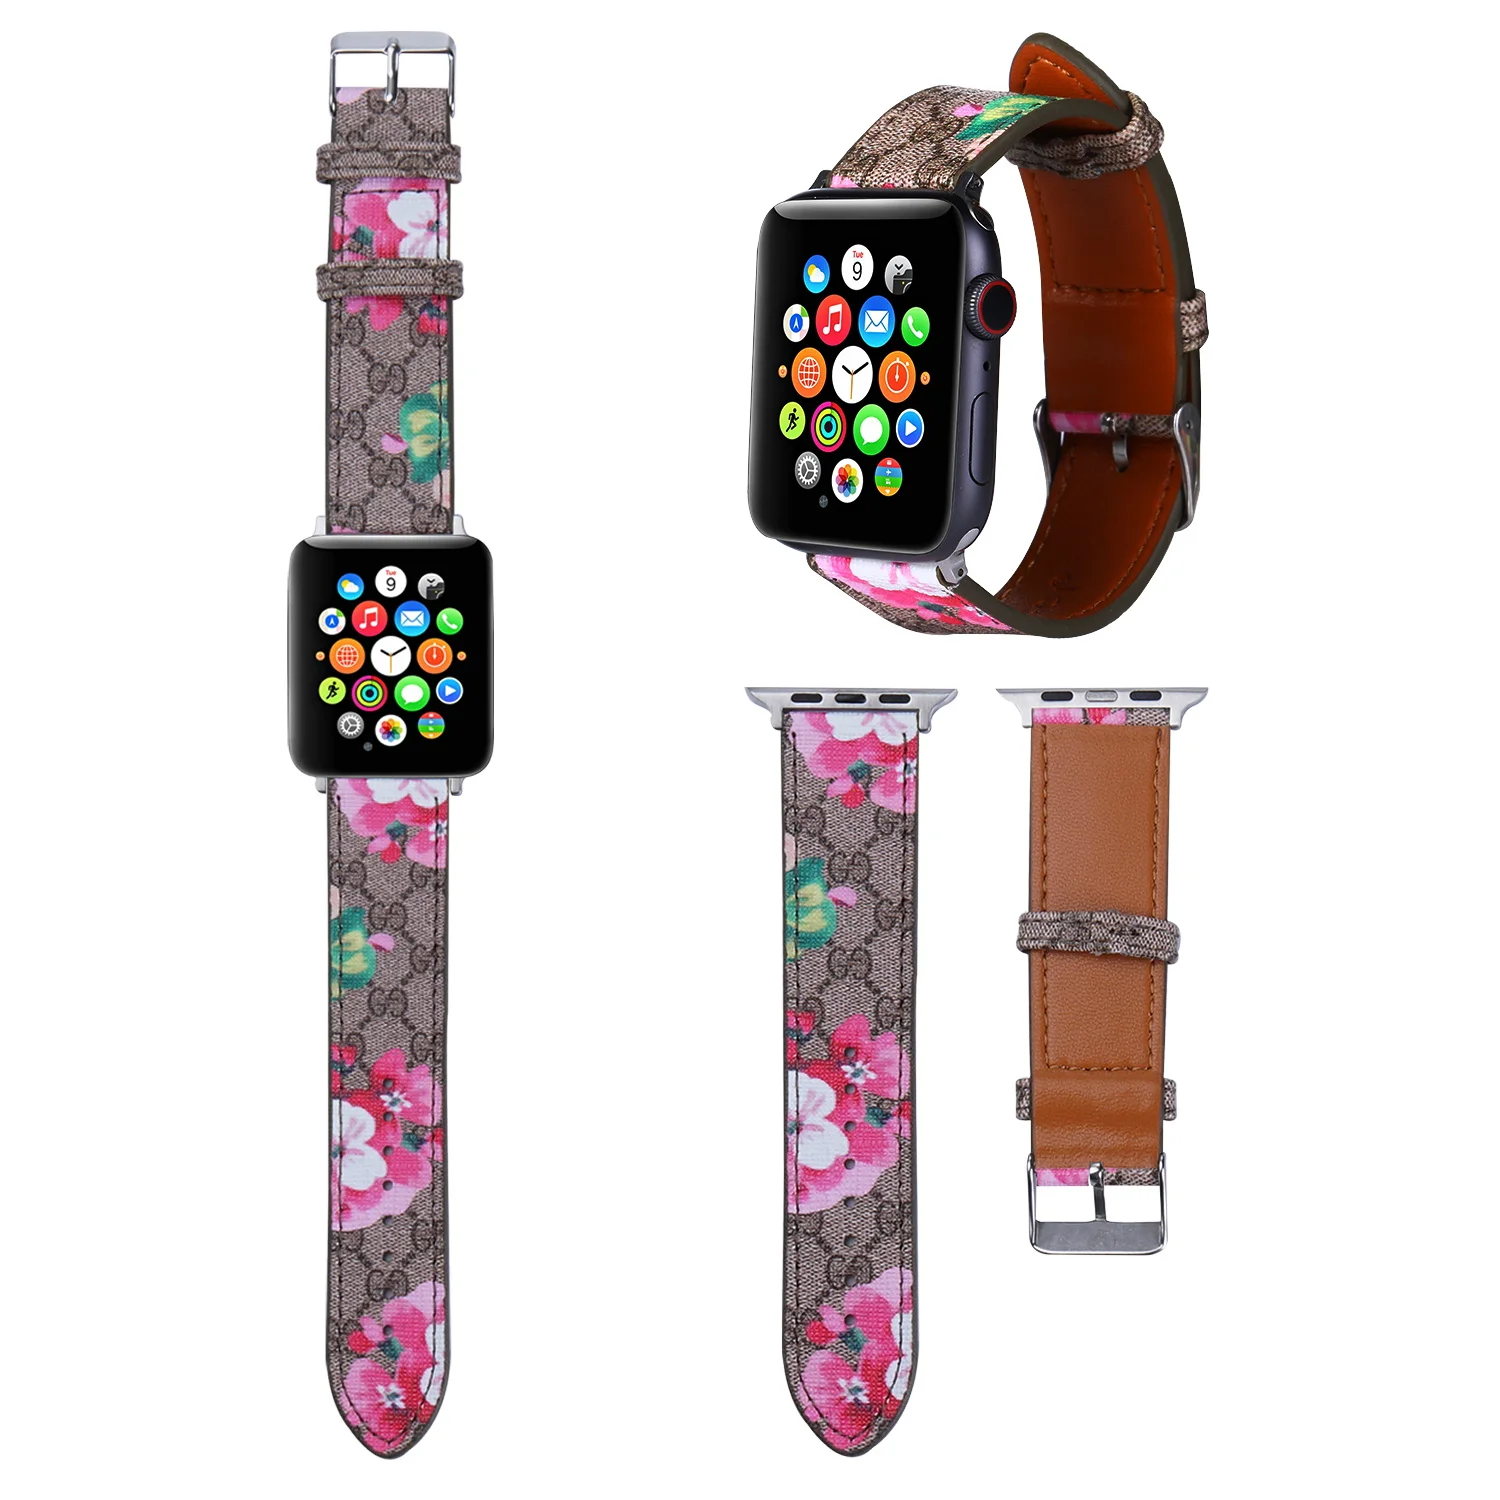 

2021 New luxury Arrivals Fashion Smart iWatch5 Leather Strap Bracelet For 22mm Apple Watch Band series6 bandas de repuesto reloj, Various colors to you choose